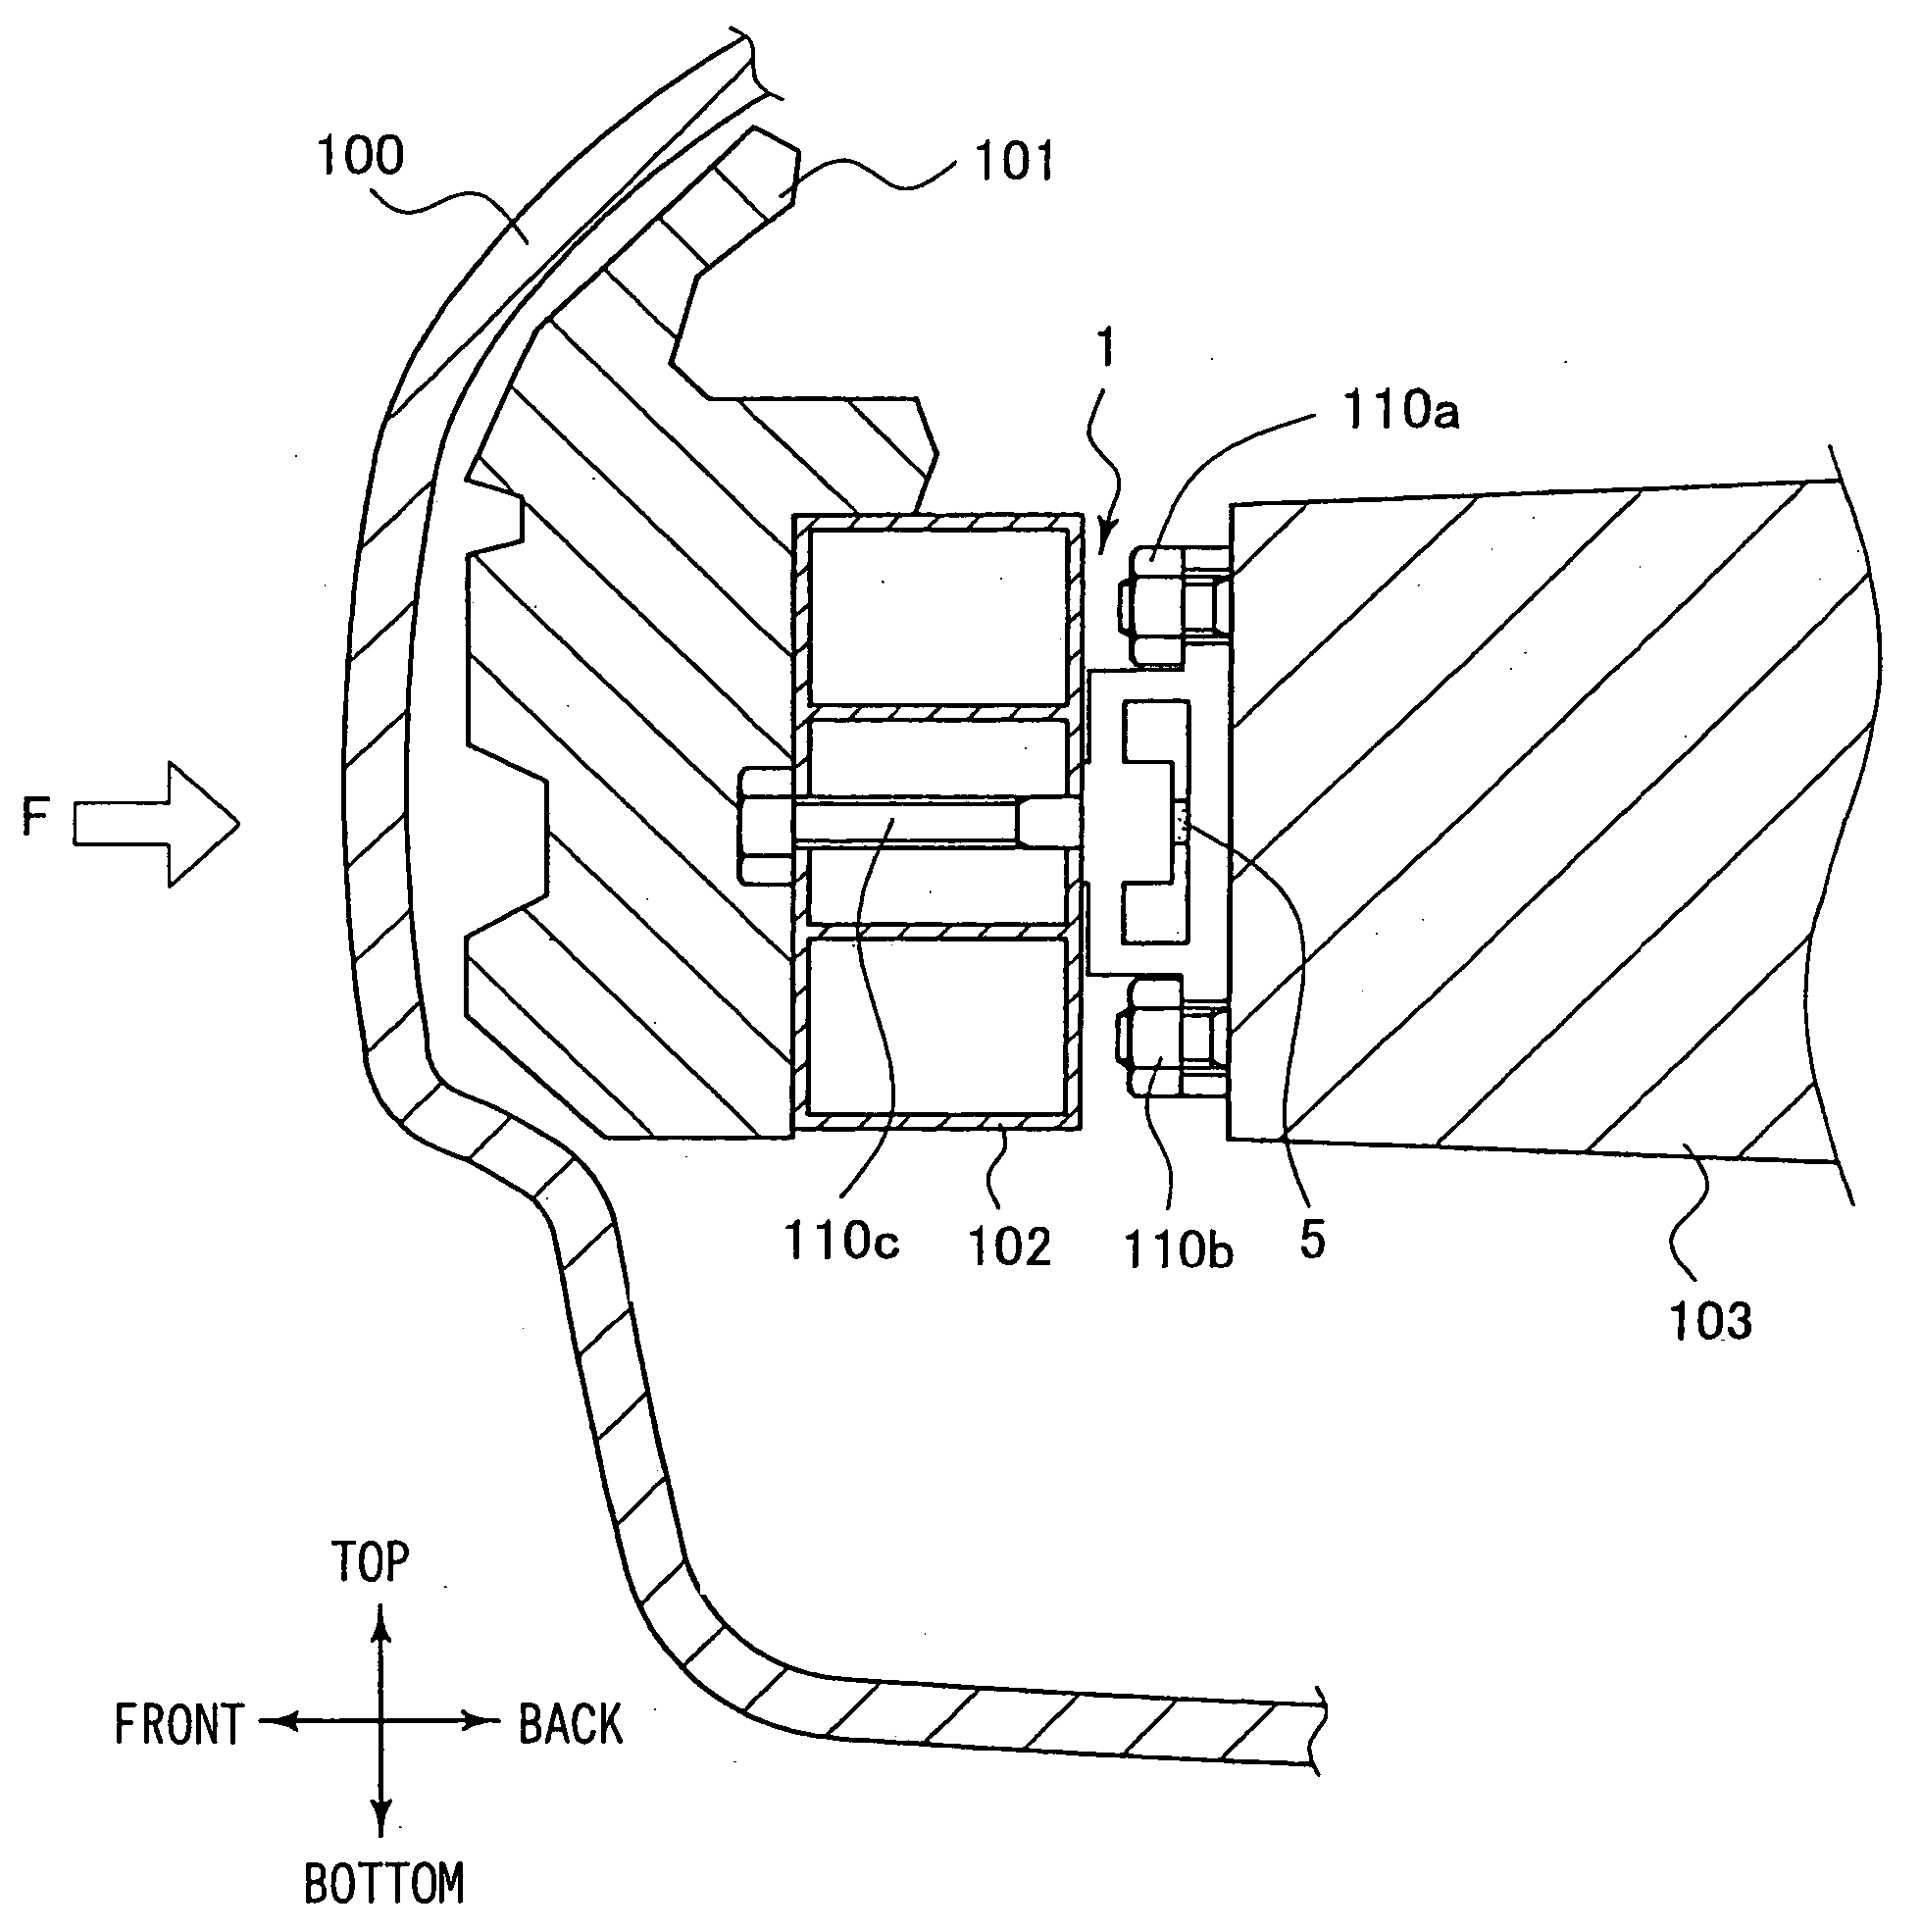 Load-detecting device